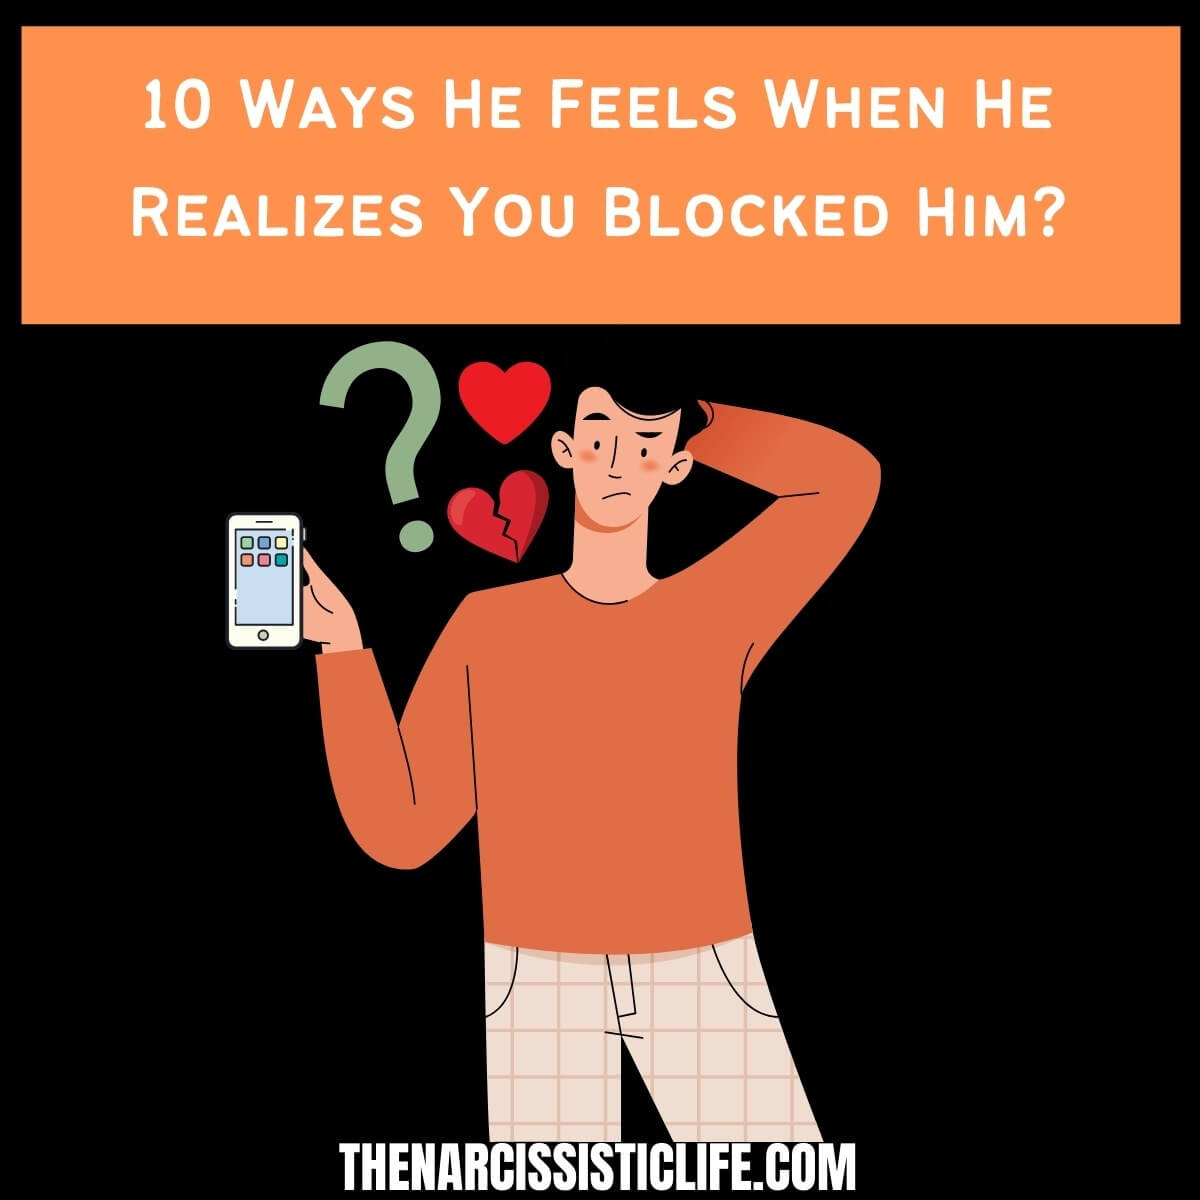 10 Ways He Feels When He Realizes You Blocked Him